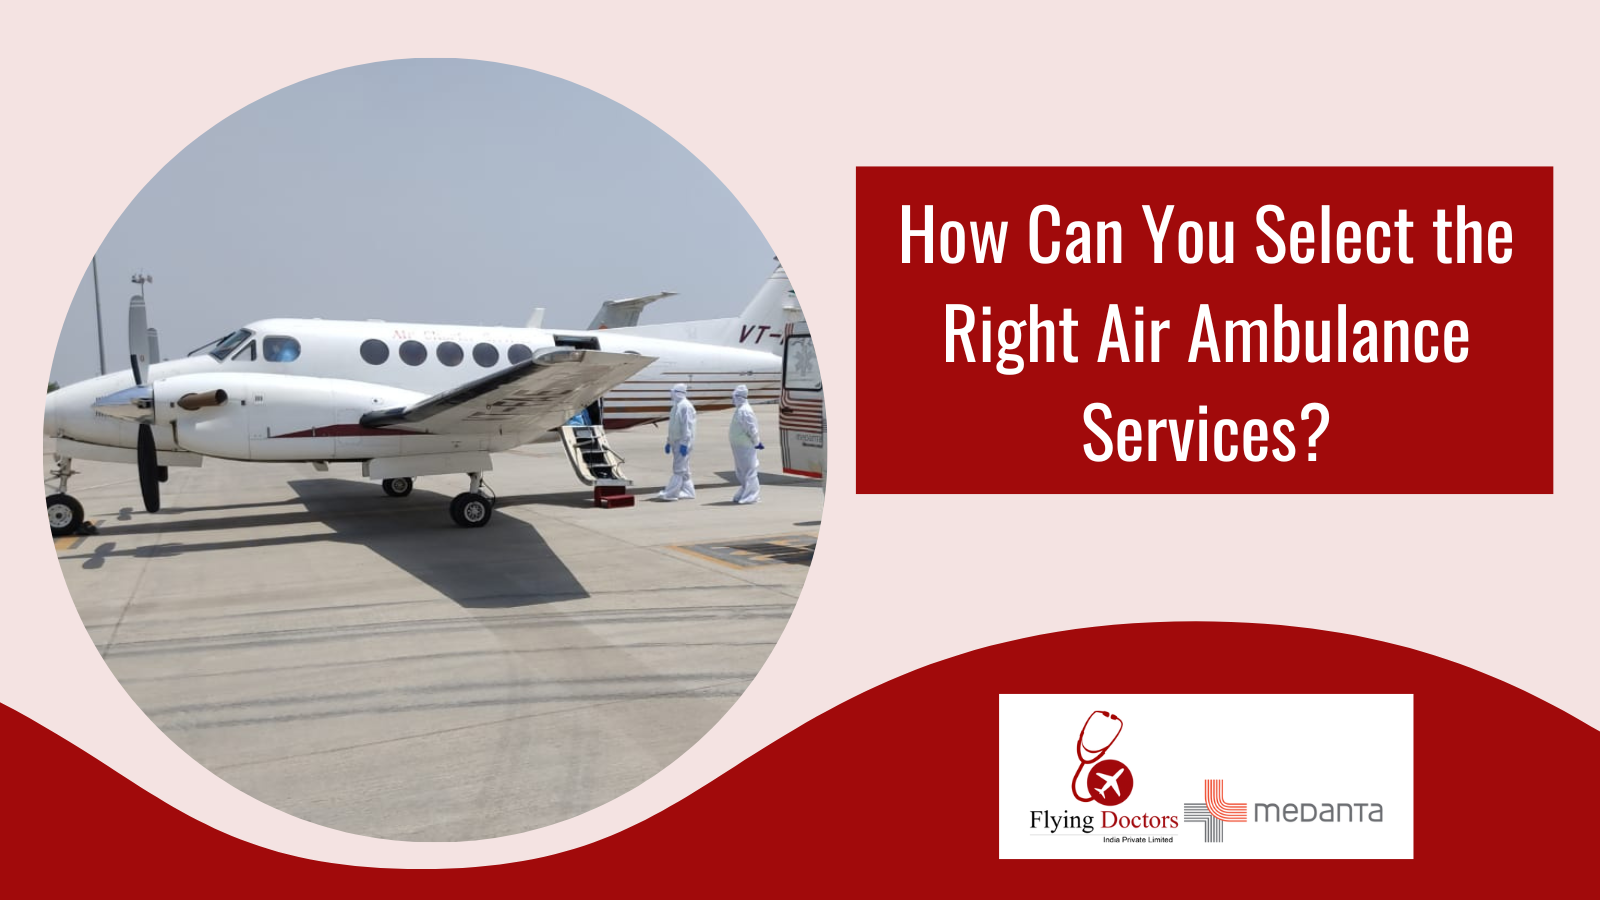 How Can You Select the Right Air Ambulance Services?